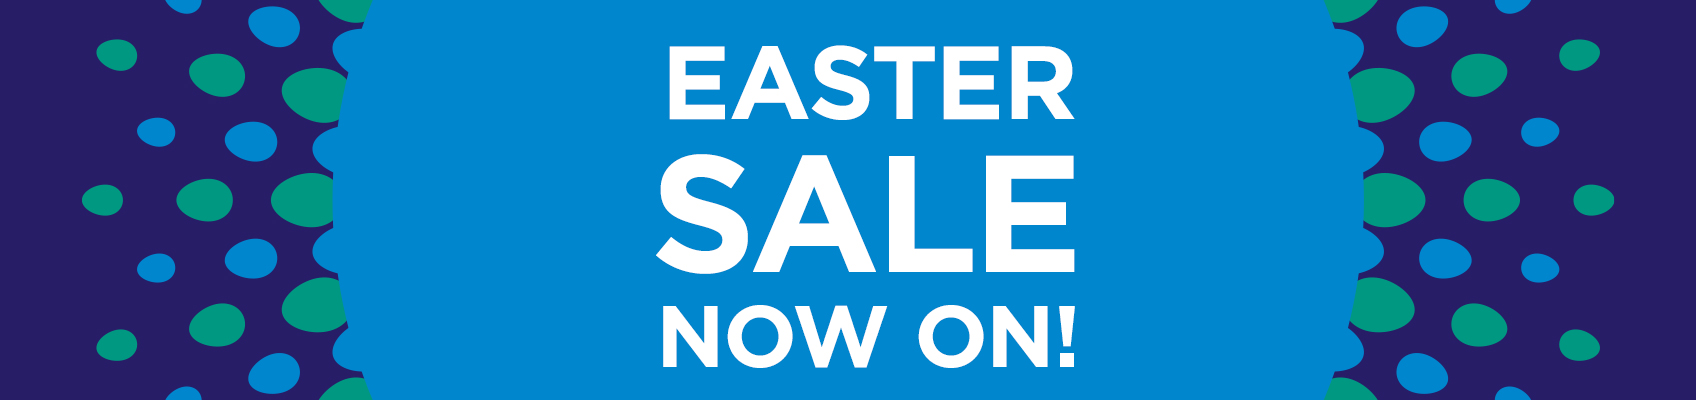 Wex Photo Video Easter Offers